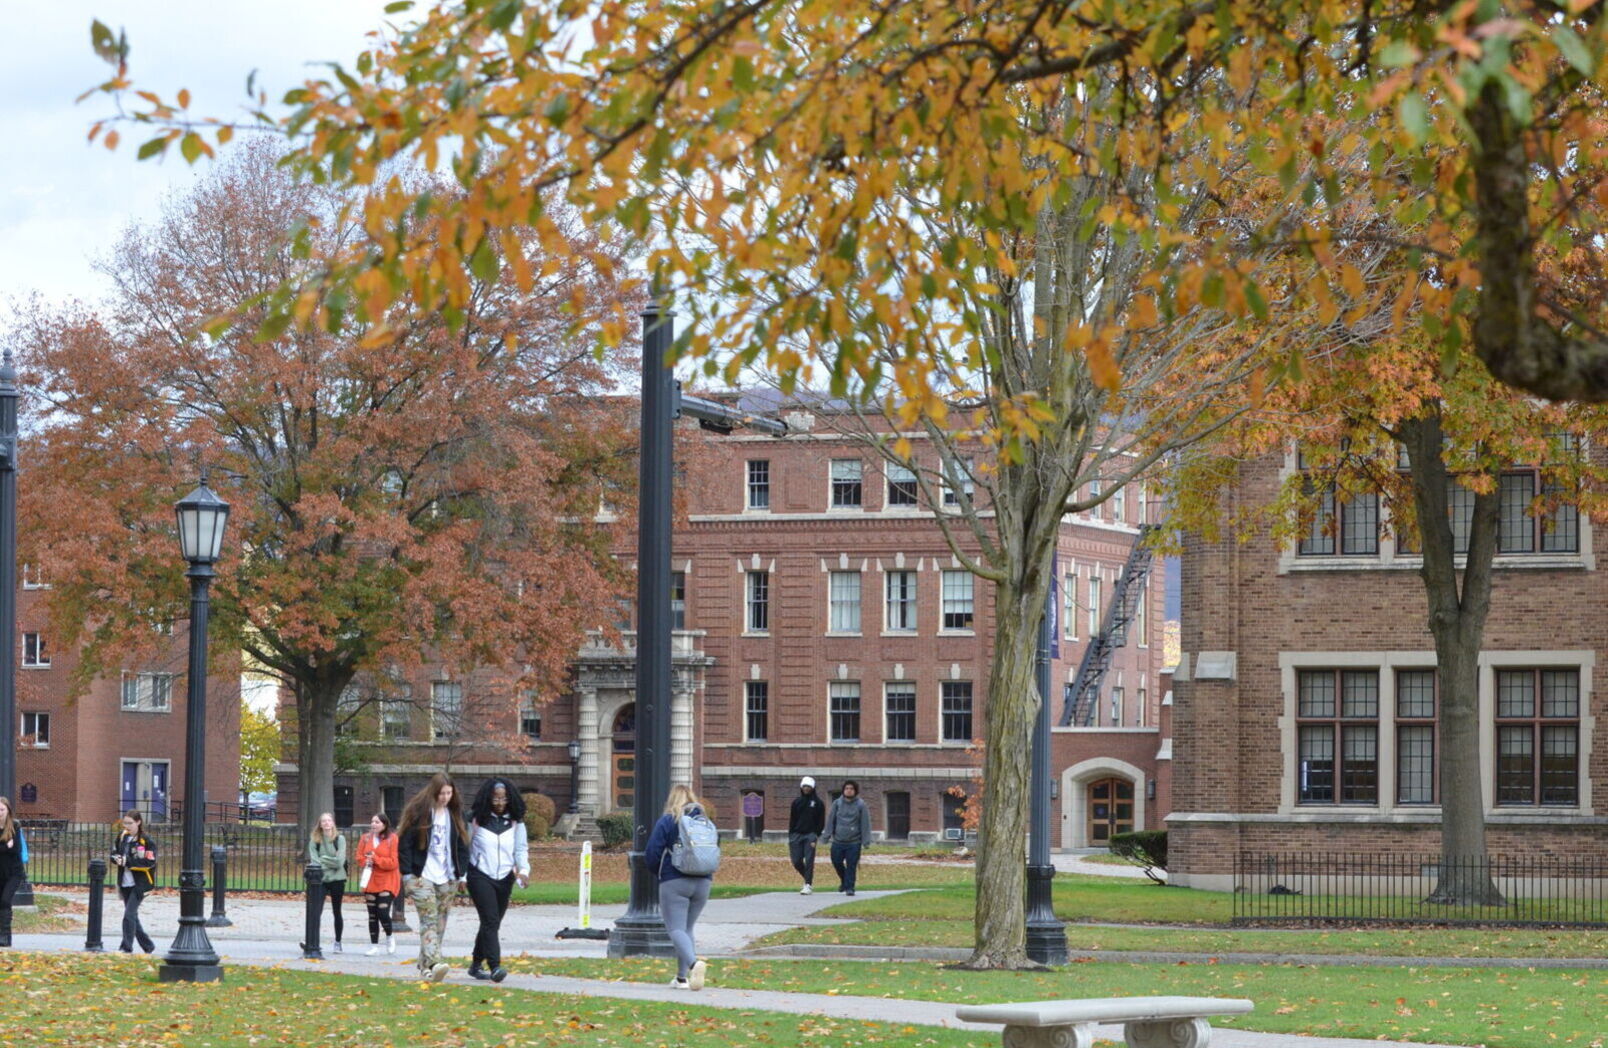 Students walk across campus surrounded by trees with colorful autumn leaves